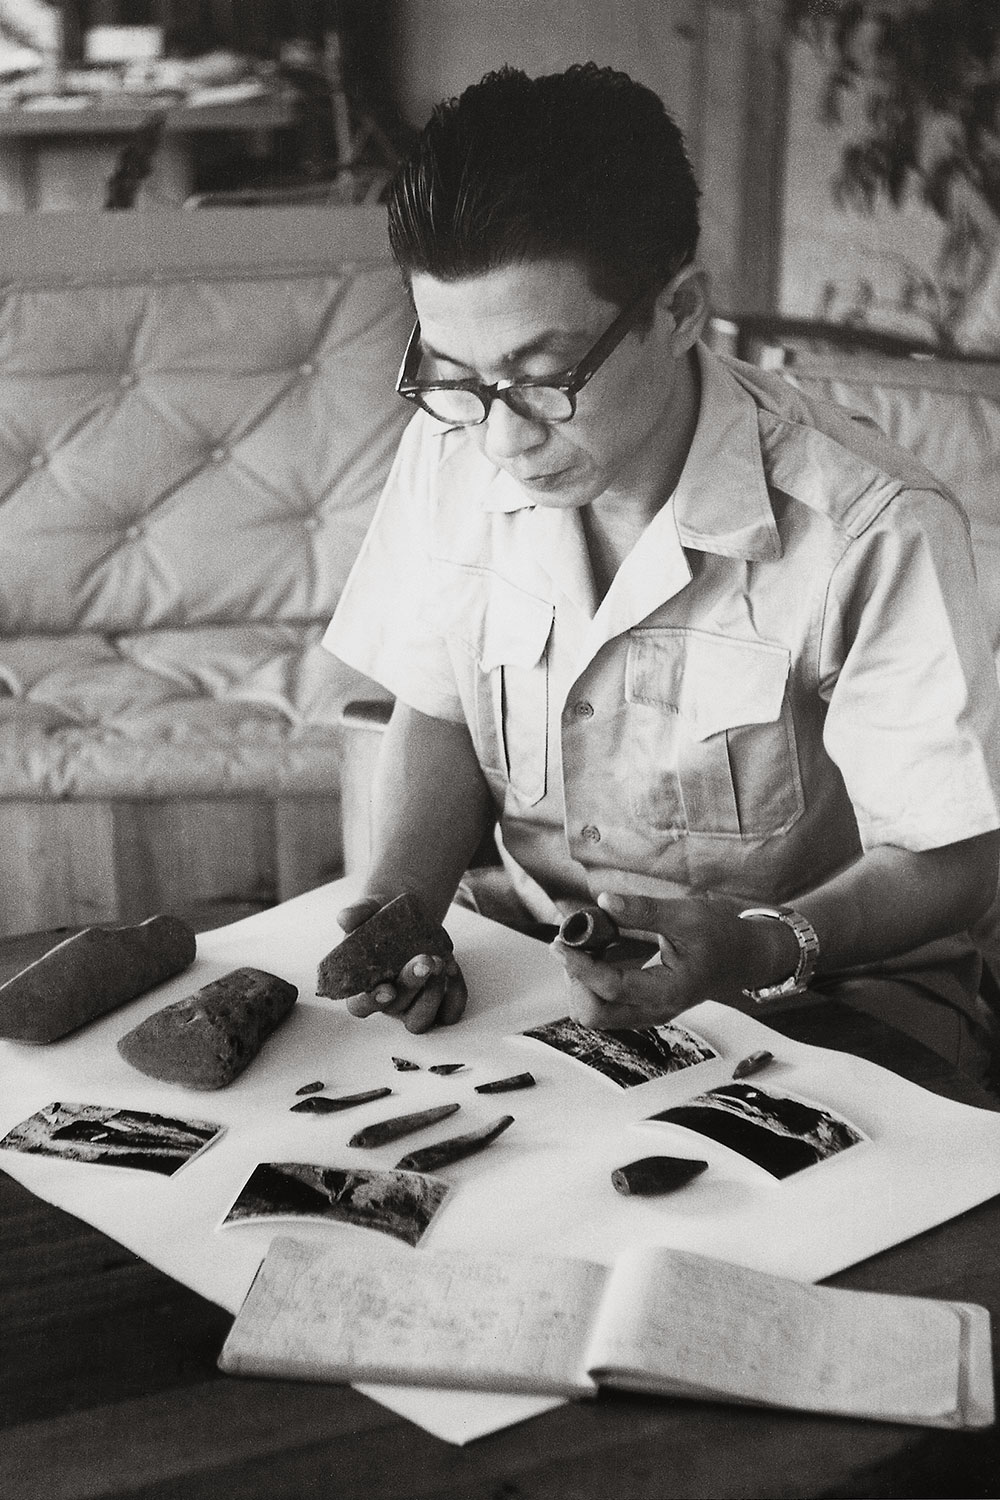 Black and white image of an asian man with glasses examining artifacts.